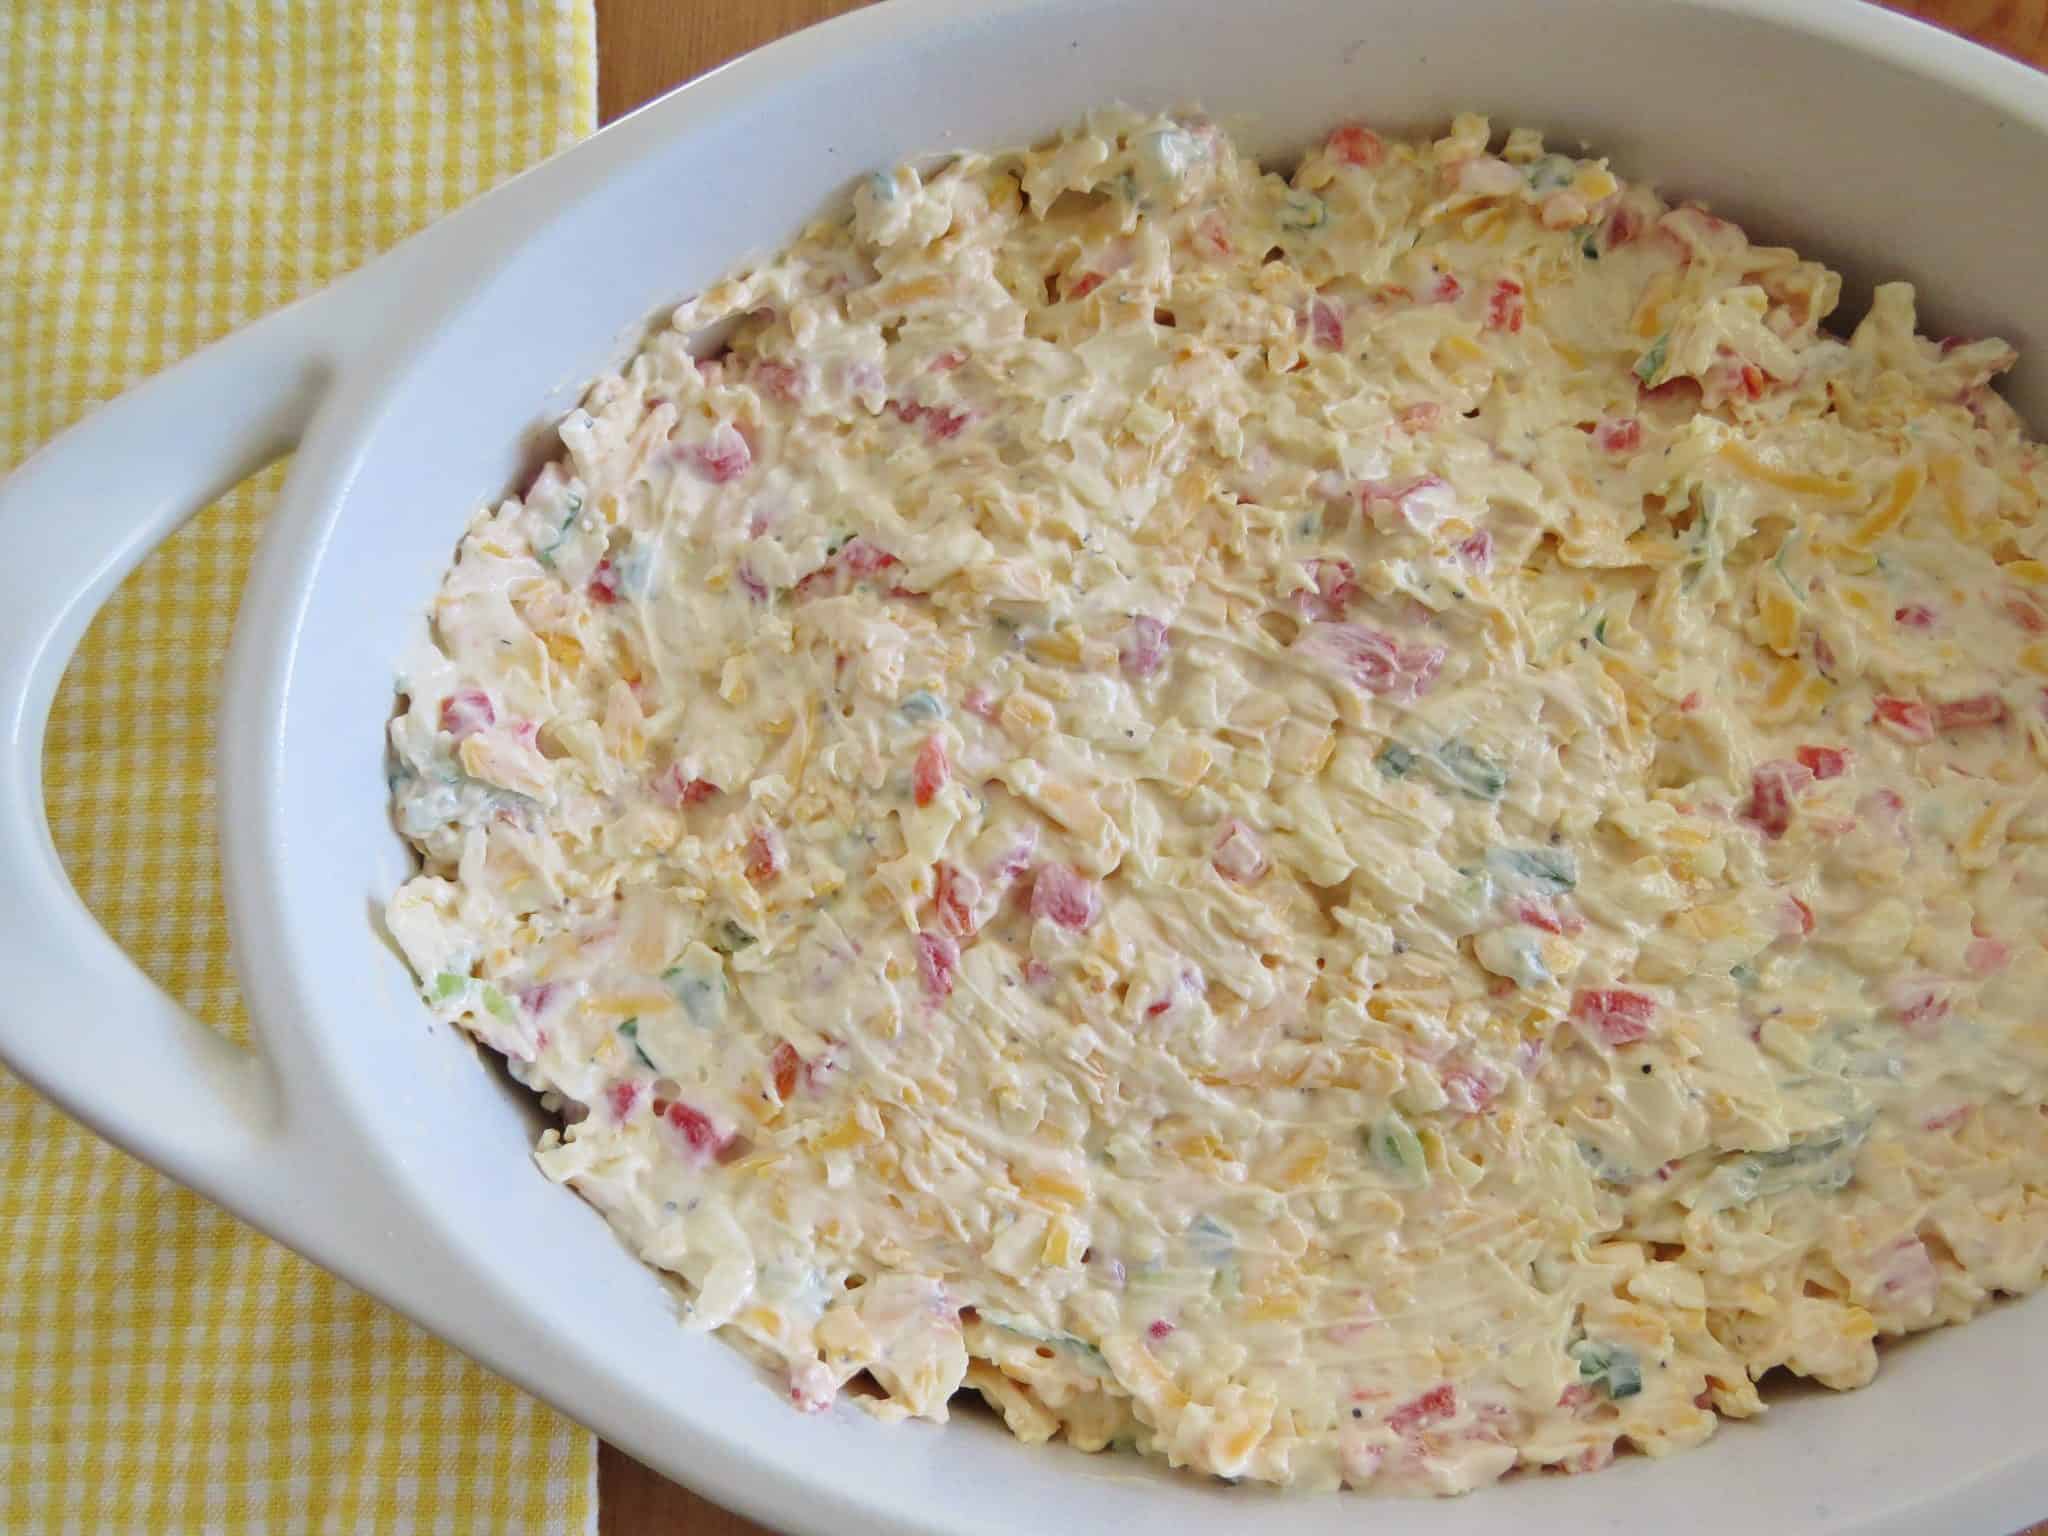 pimiento cheese dip mixture spread into an oval white baking dish.